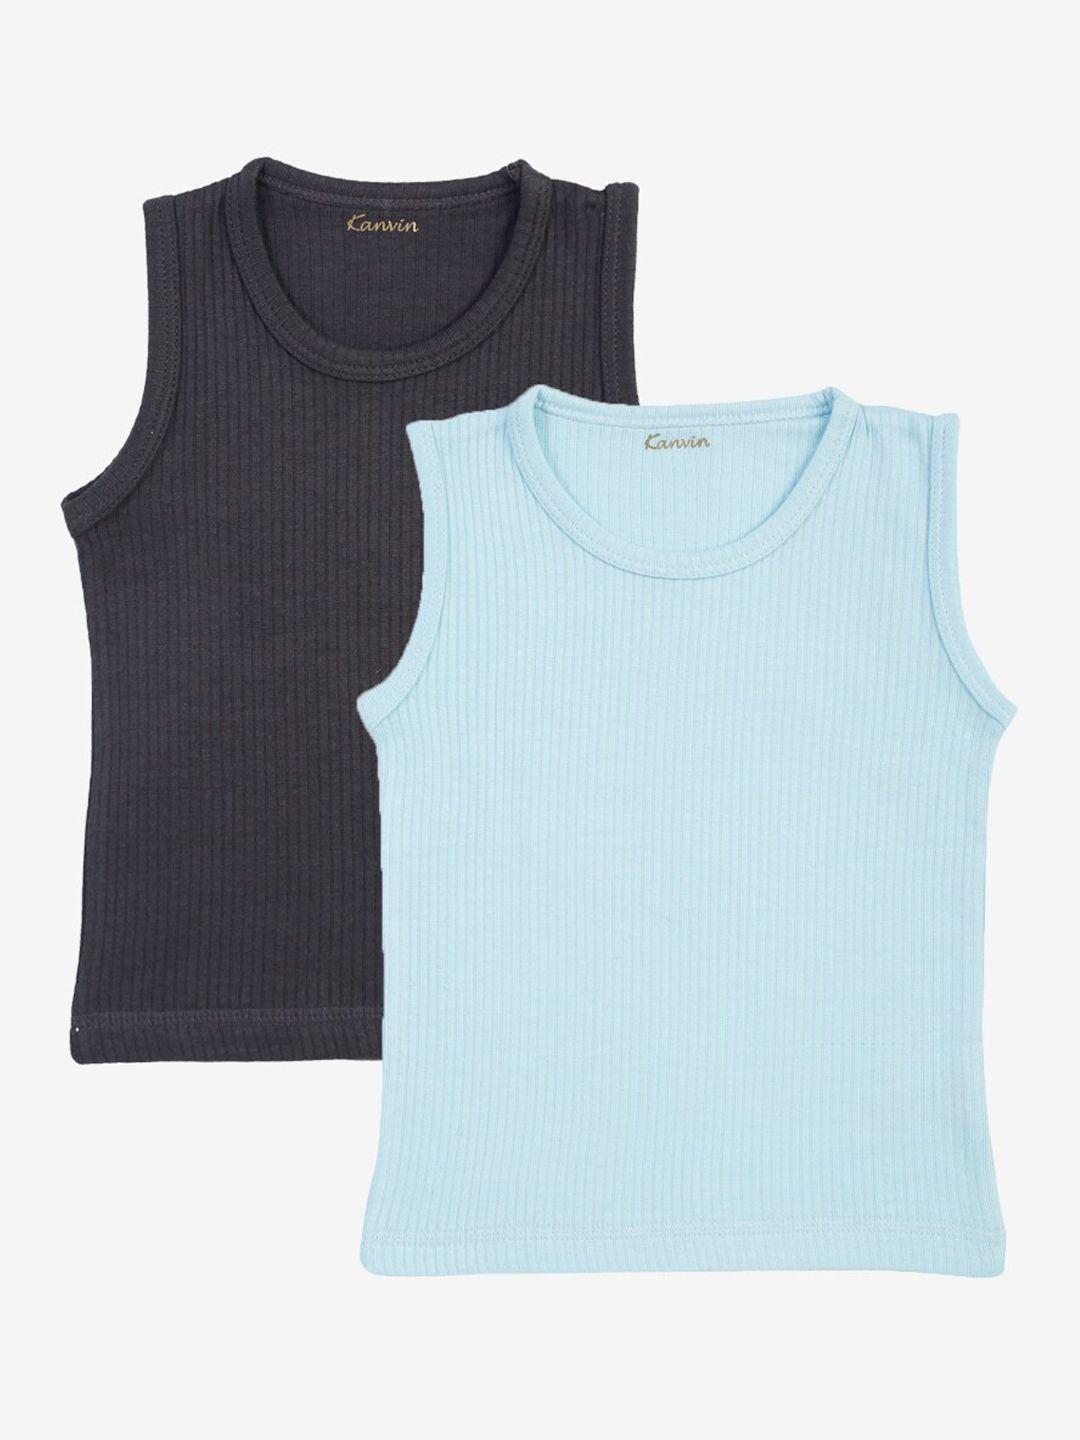 kanvin boys pack of 2 turquoise blue & charcoal solid thermal tops